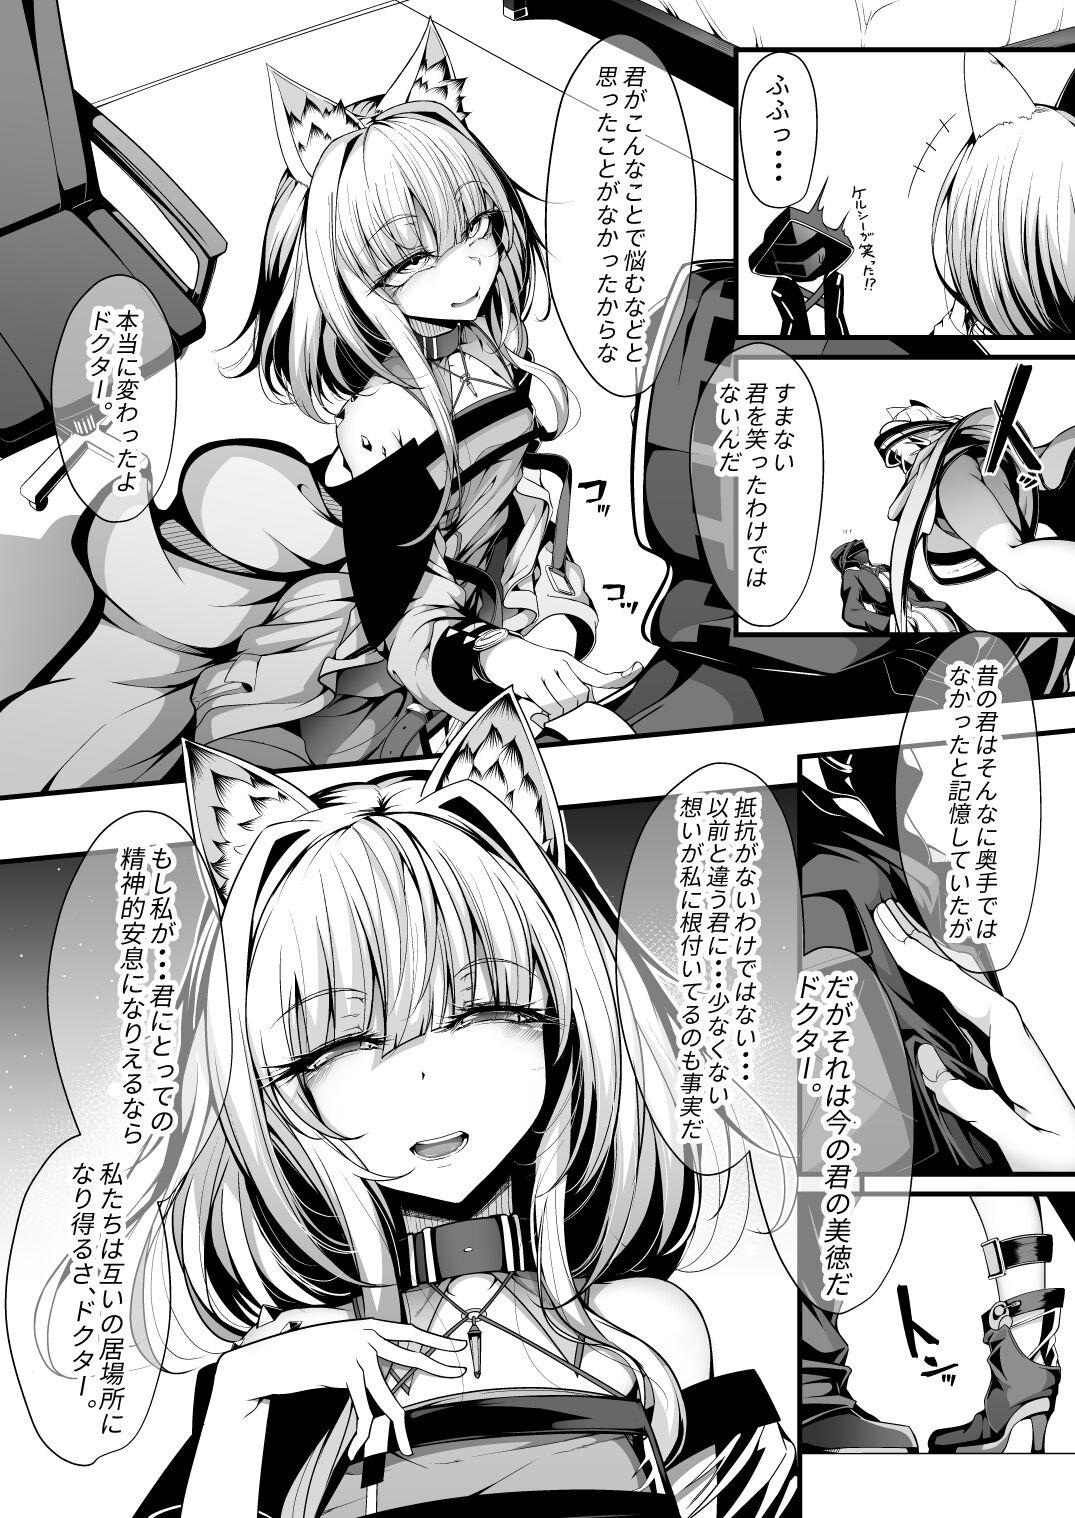 Flash M.P. Vol. 22 - Arknights Leche - Page 9